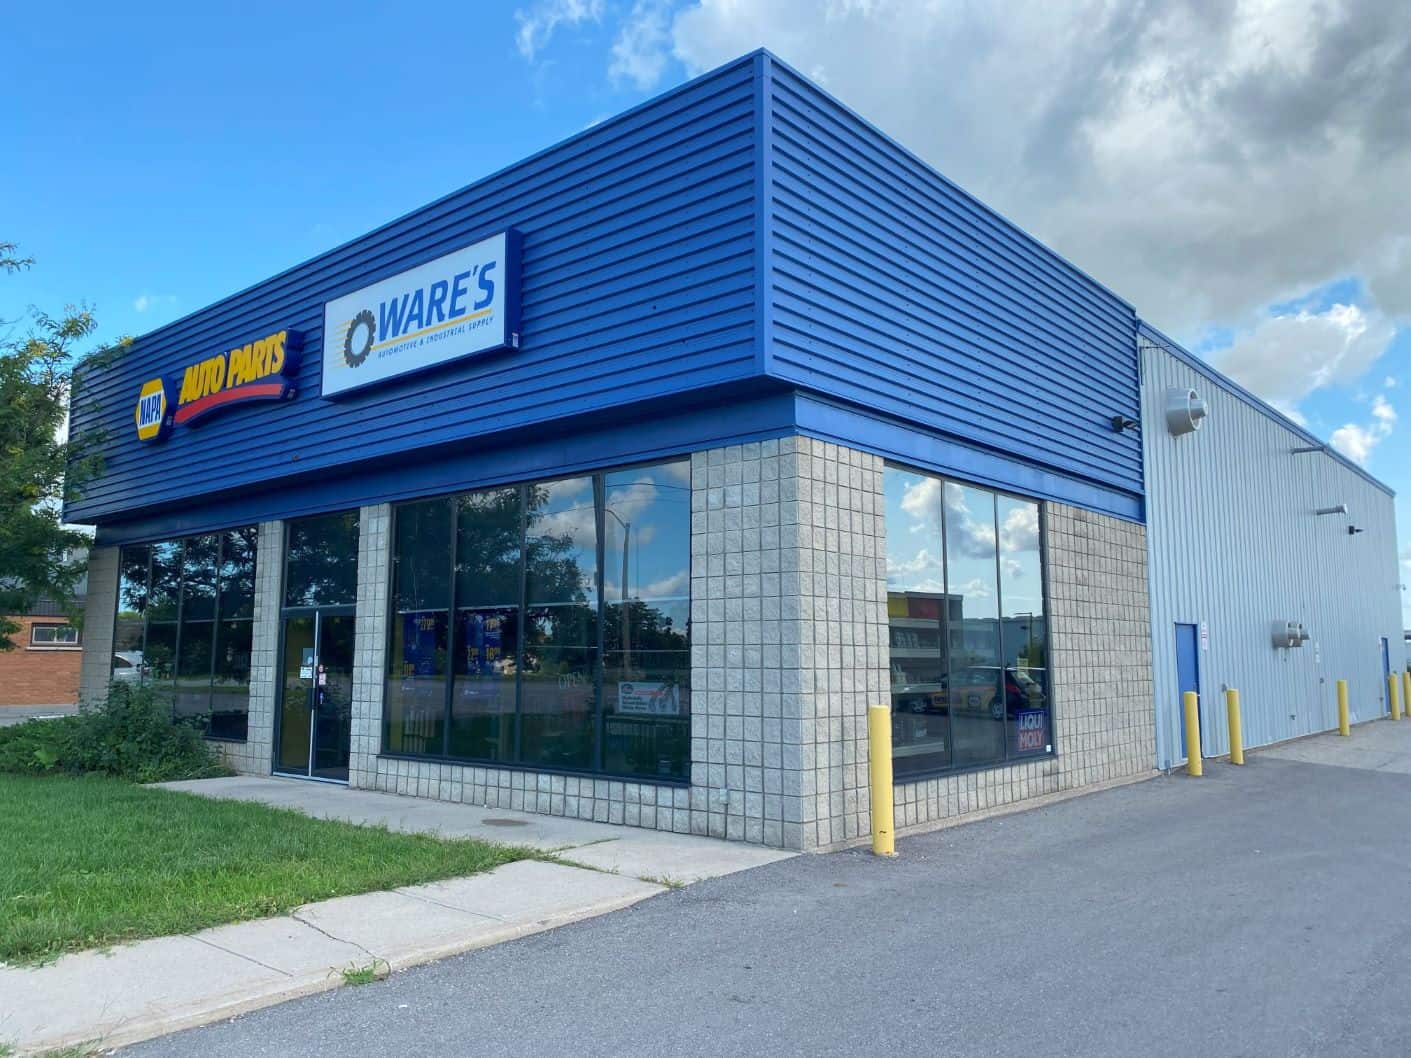 Commercial building freshly painted in Mississauga.